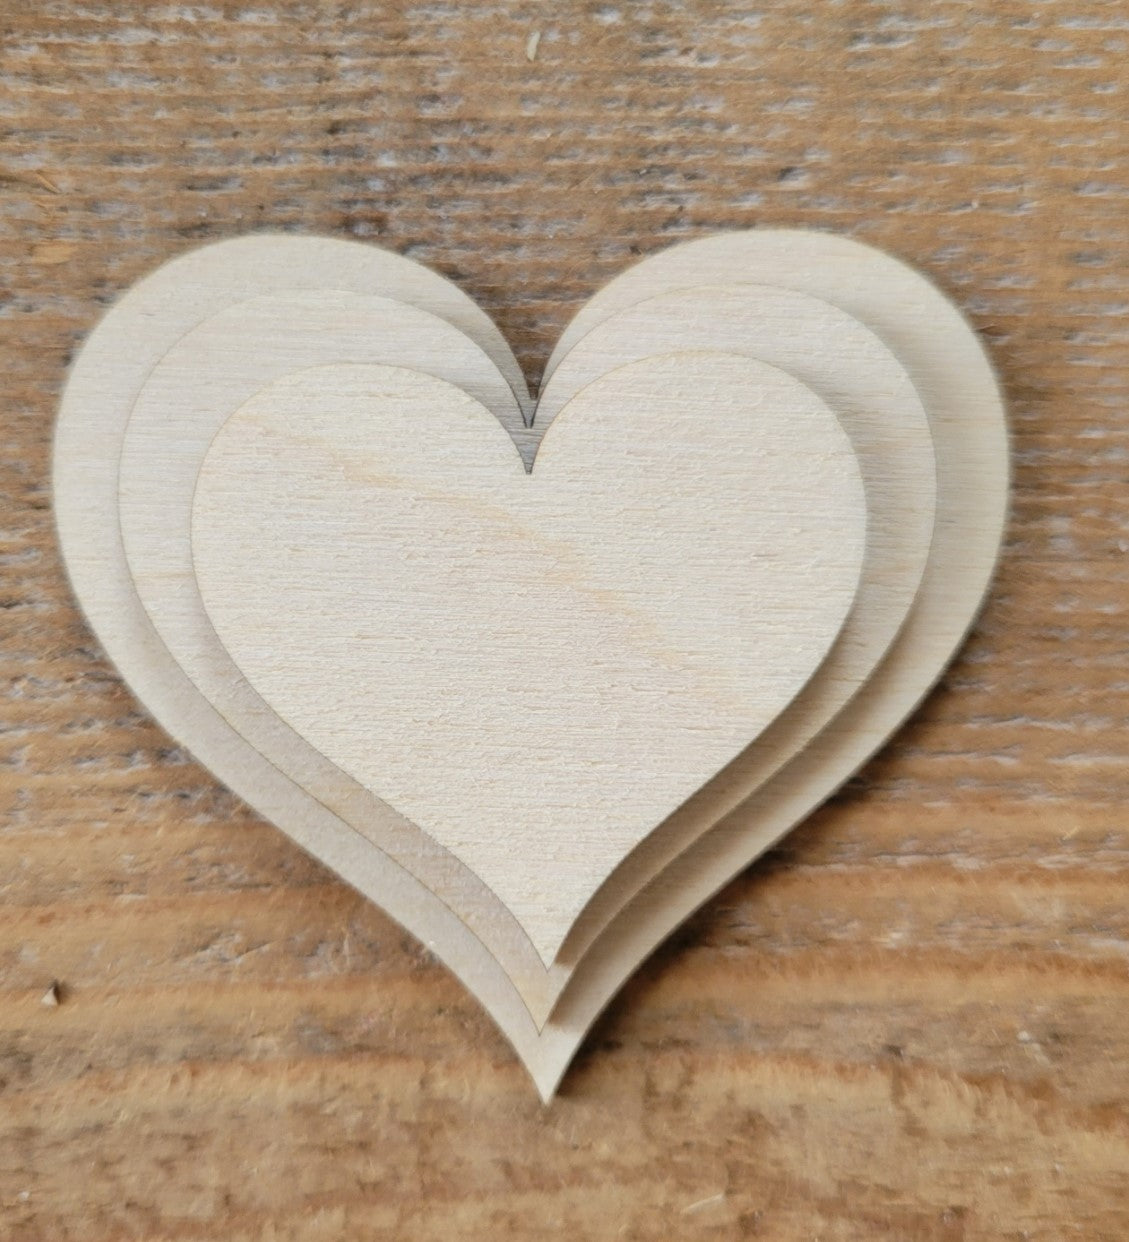 XOXO  wood cut out  Wood Blanks  Valentines Day DIY  Valentines Day Decor  Shape Blanks  love heart  LOVE  Laser DIY  kit  Holiday decoration  Holiday  hearts  heart  Gift  diy  Cute  cut out  Crafty Gifts  Blank Shapes